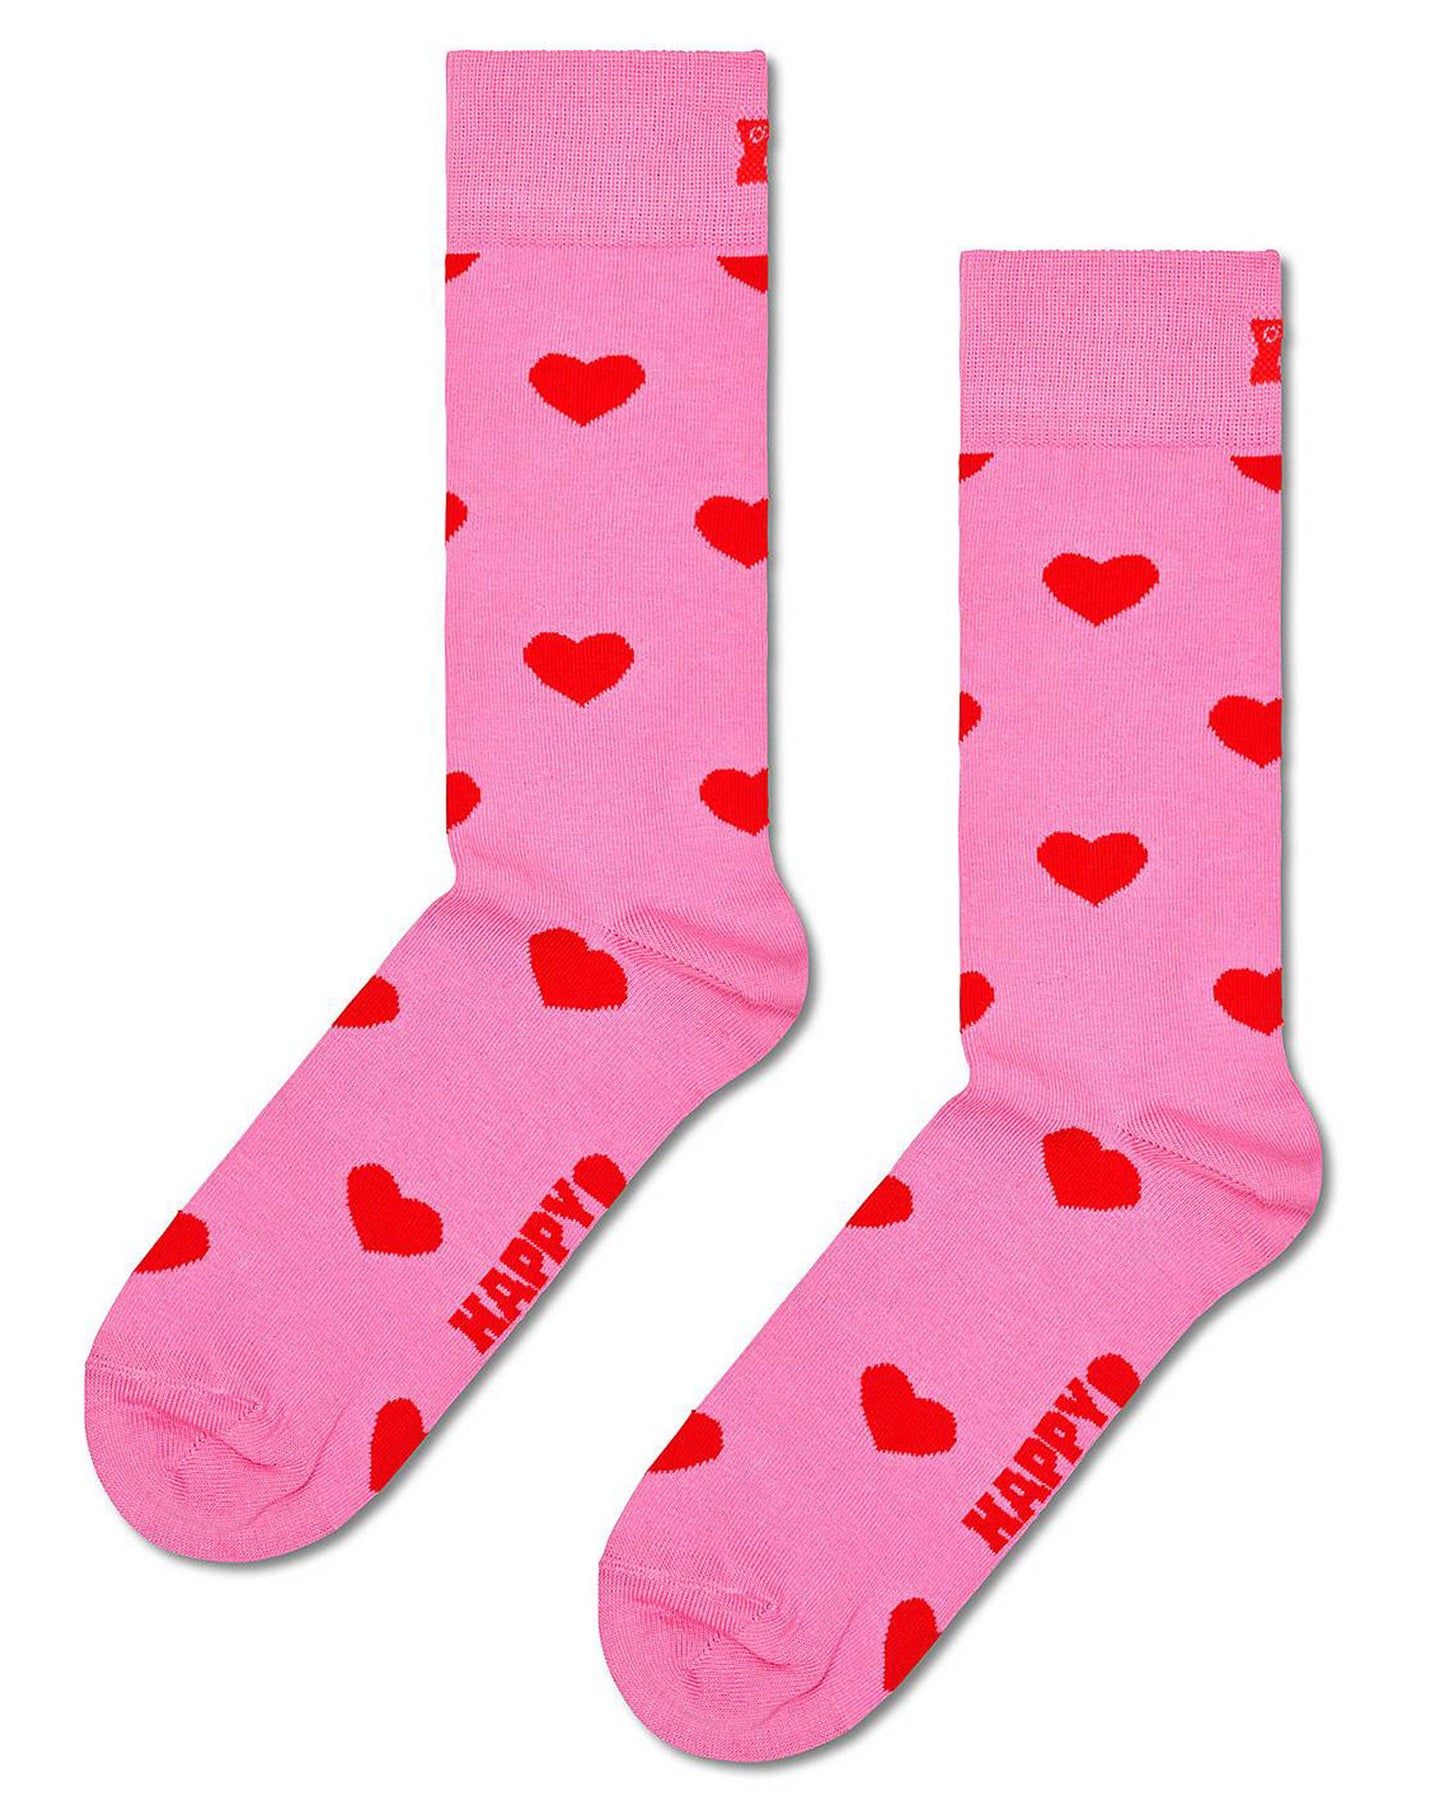 Happy Socks Heart Socks - Light pink cotton crew socks with all over red heart pattern.